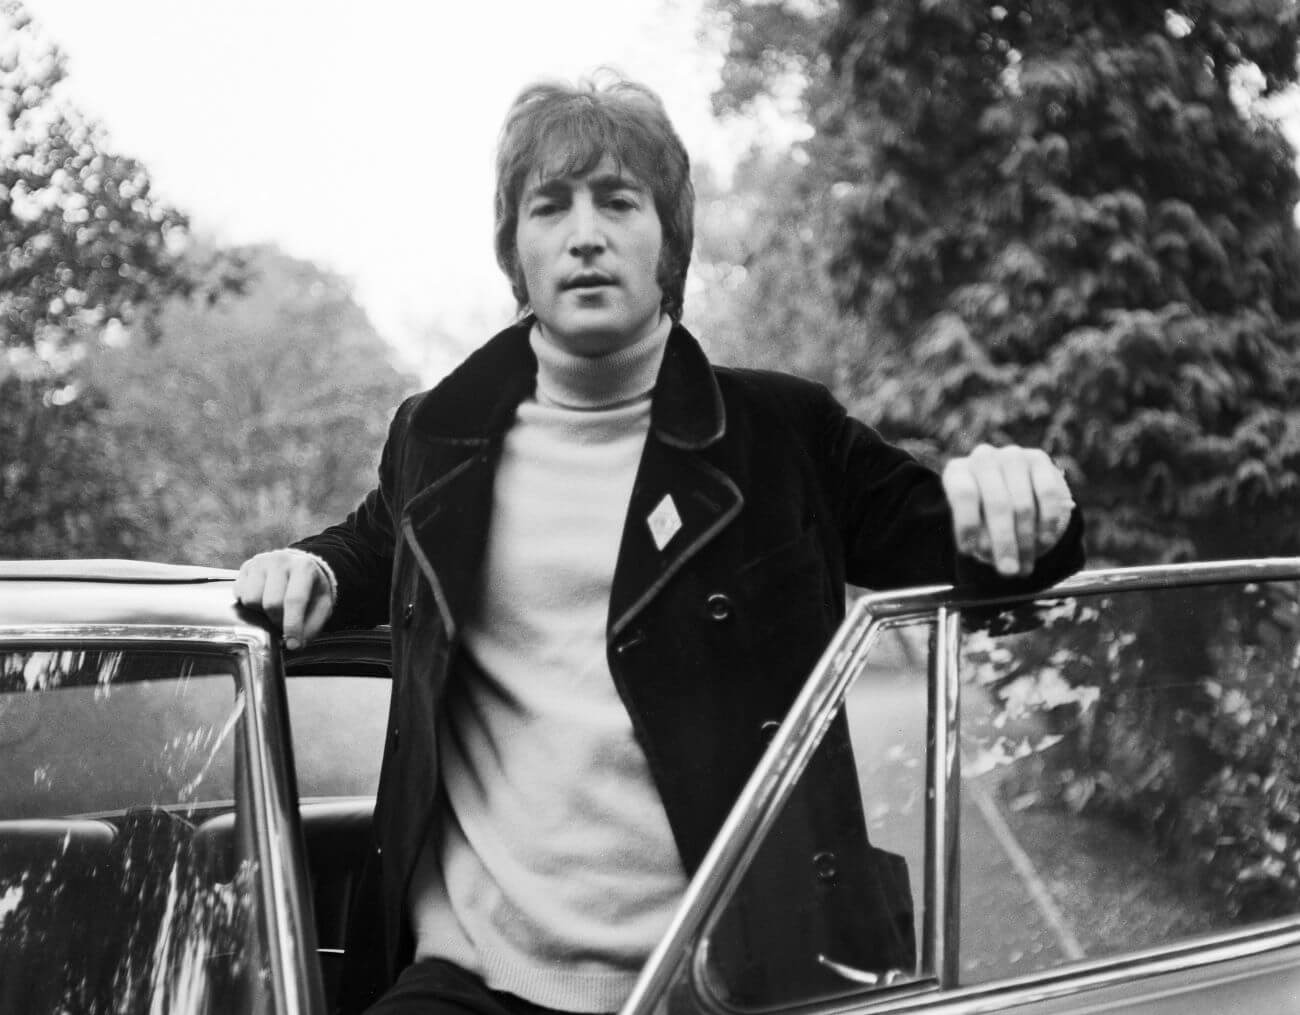 A black and white picture of John Lennon standing behind an open car door.